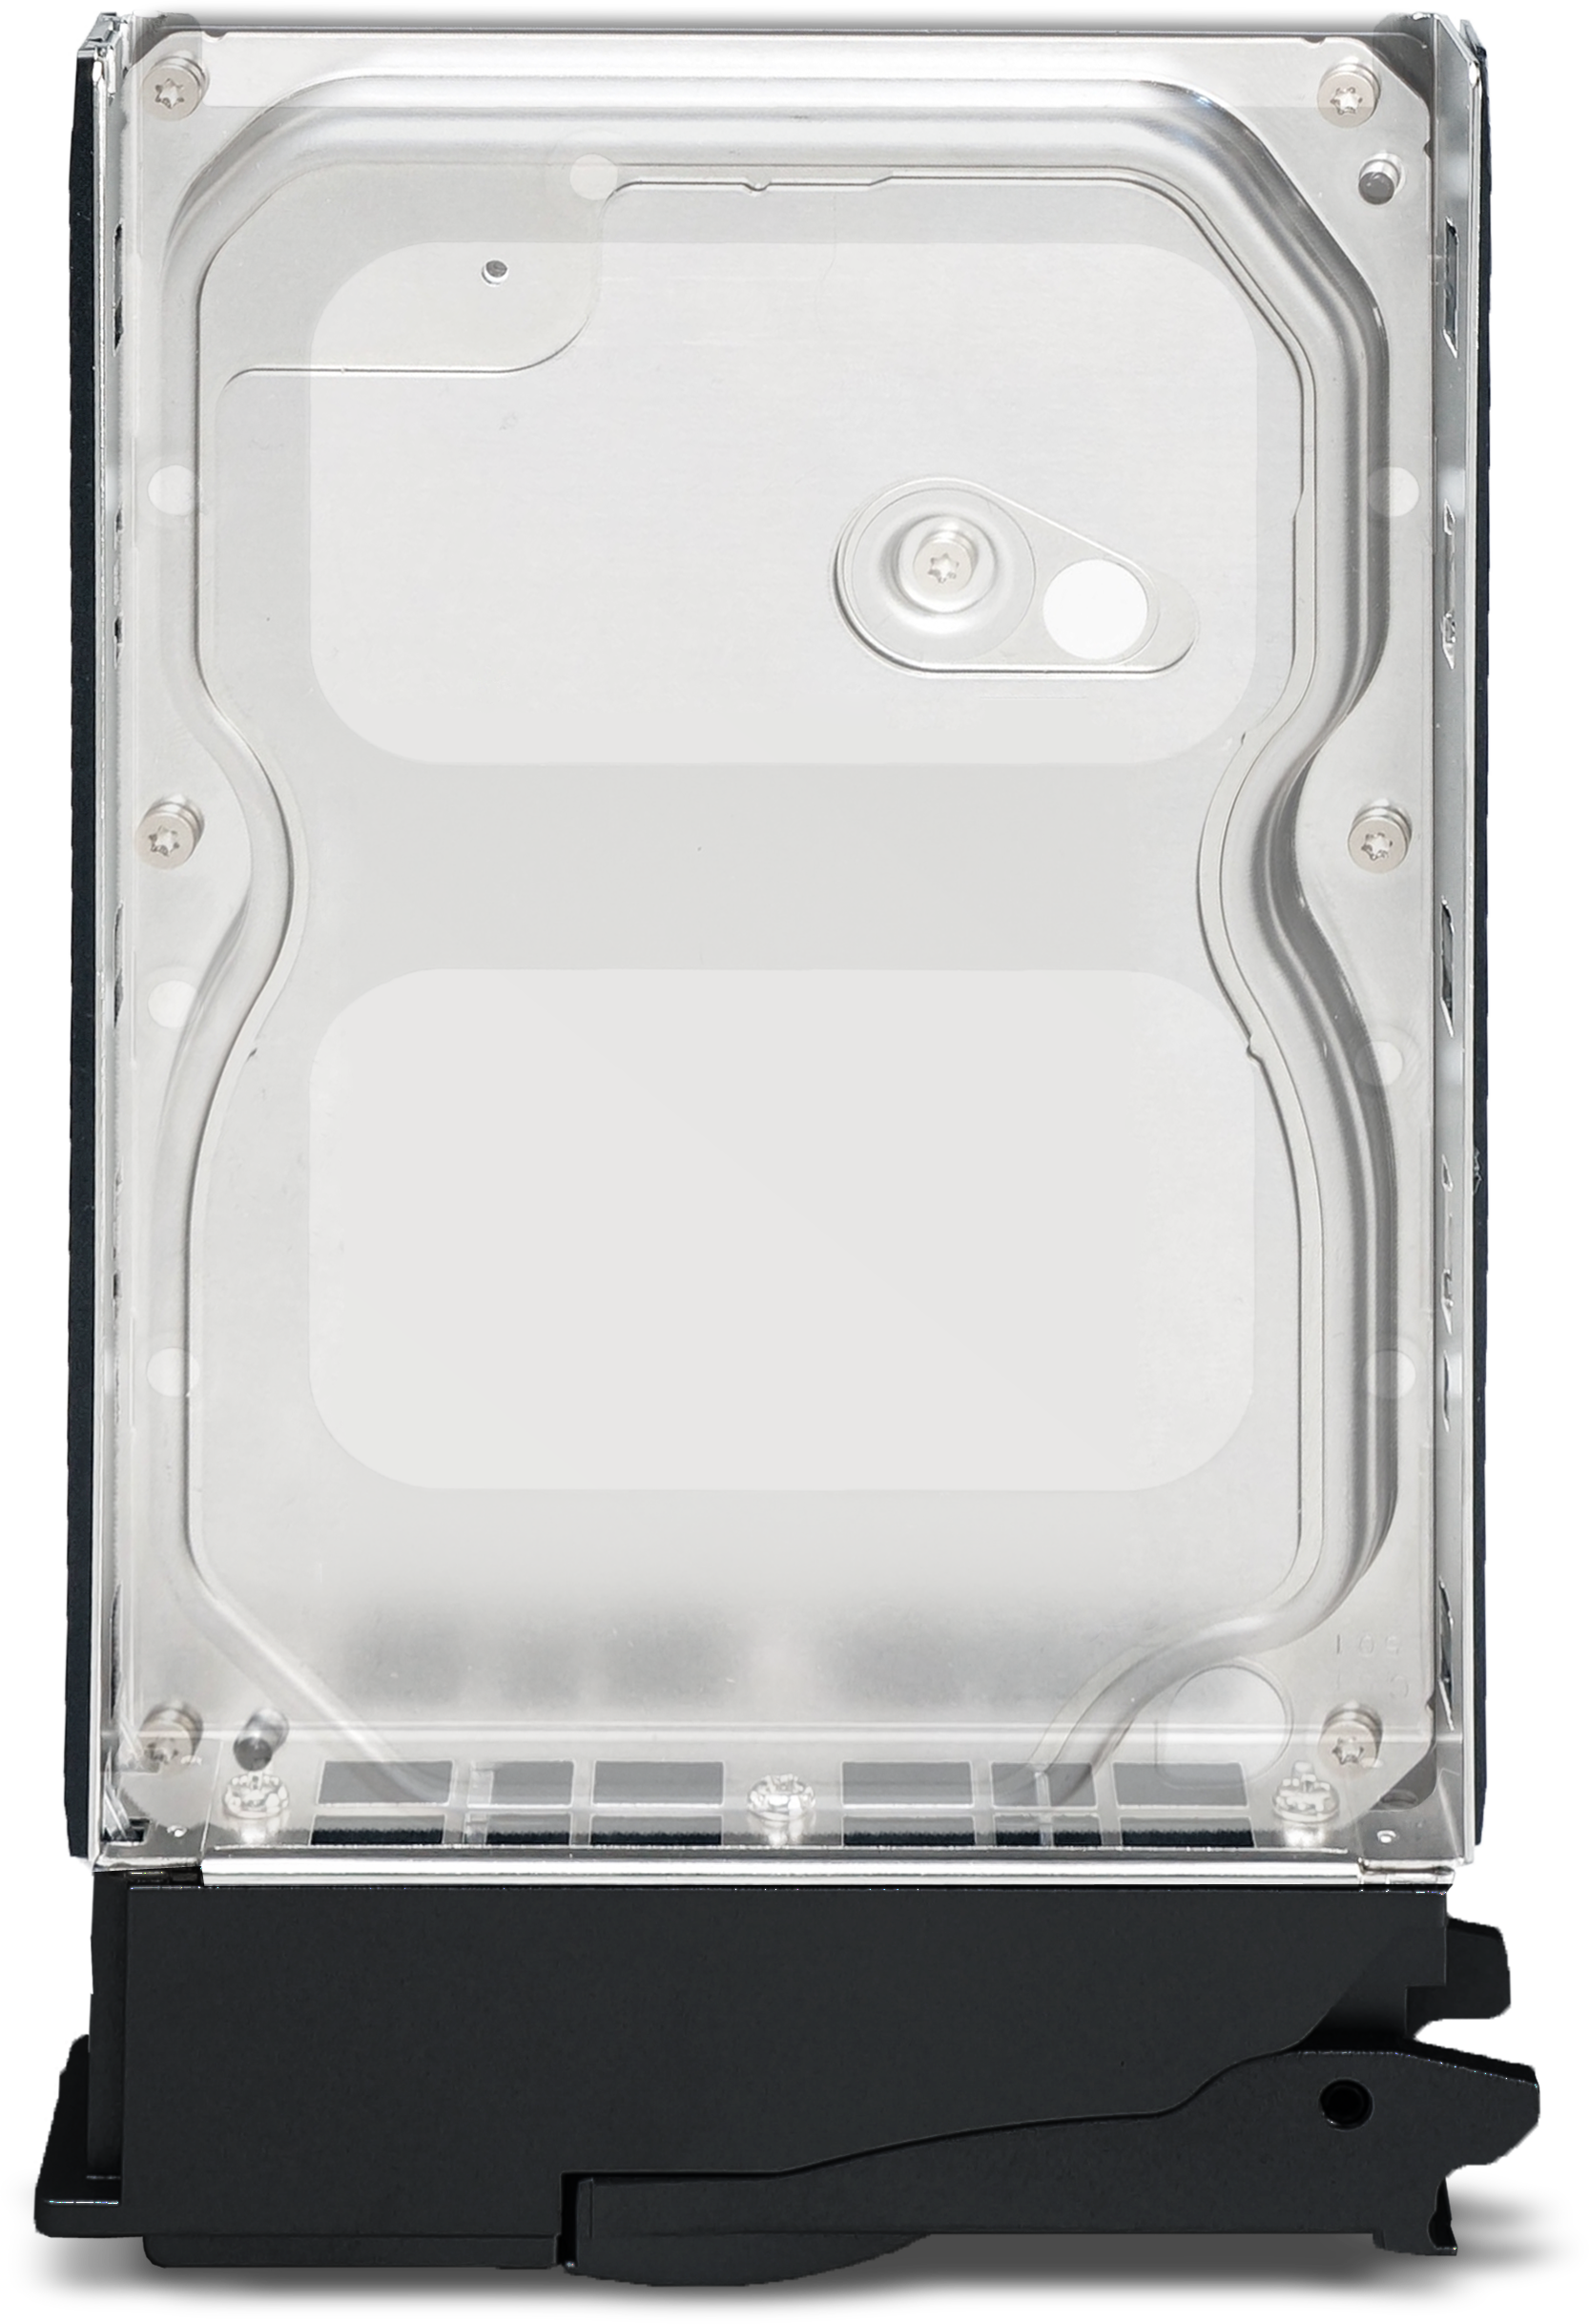 netstor na331a disk tray is suitable for both 3.5 and 2.5 inch disk